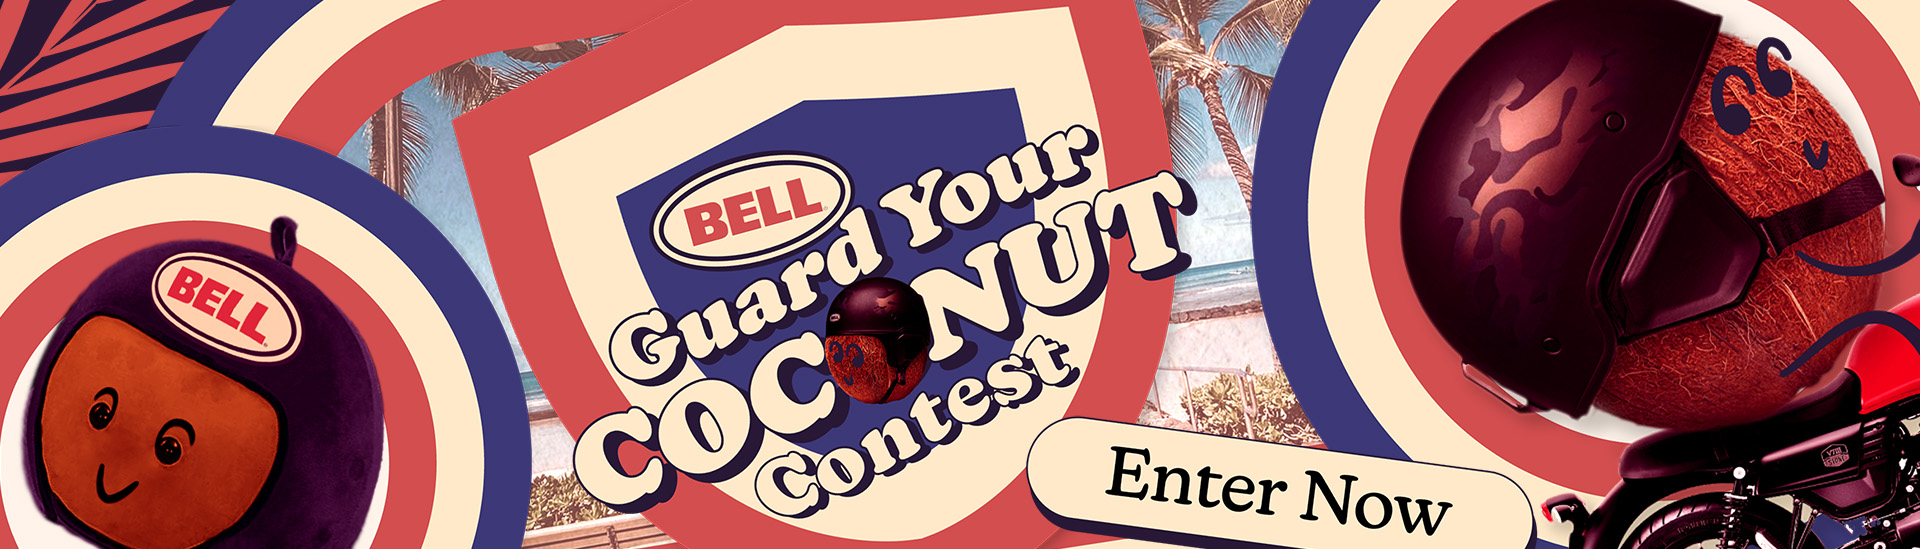 Bell helmet contest with coconut character